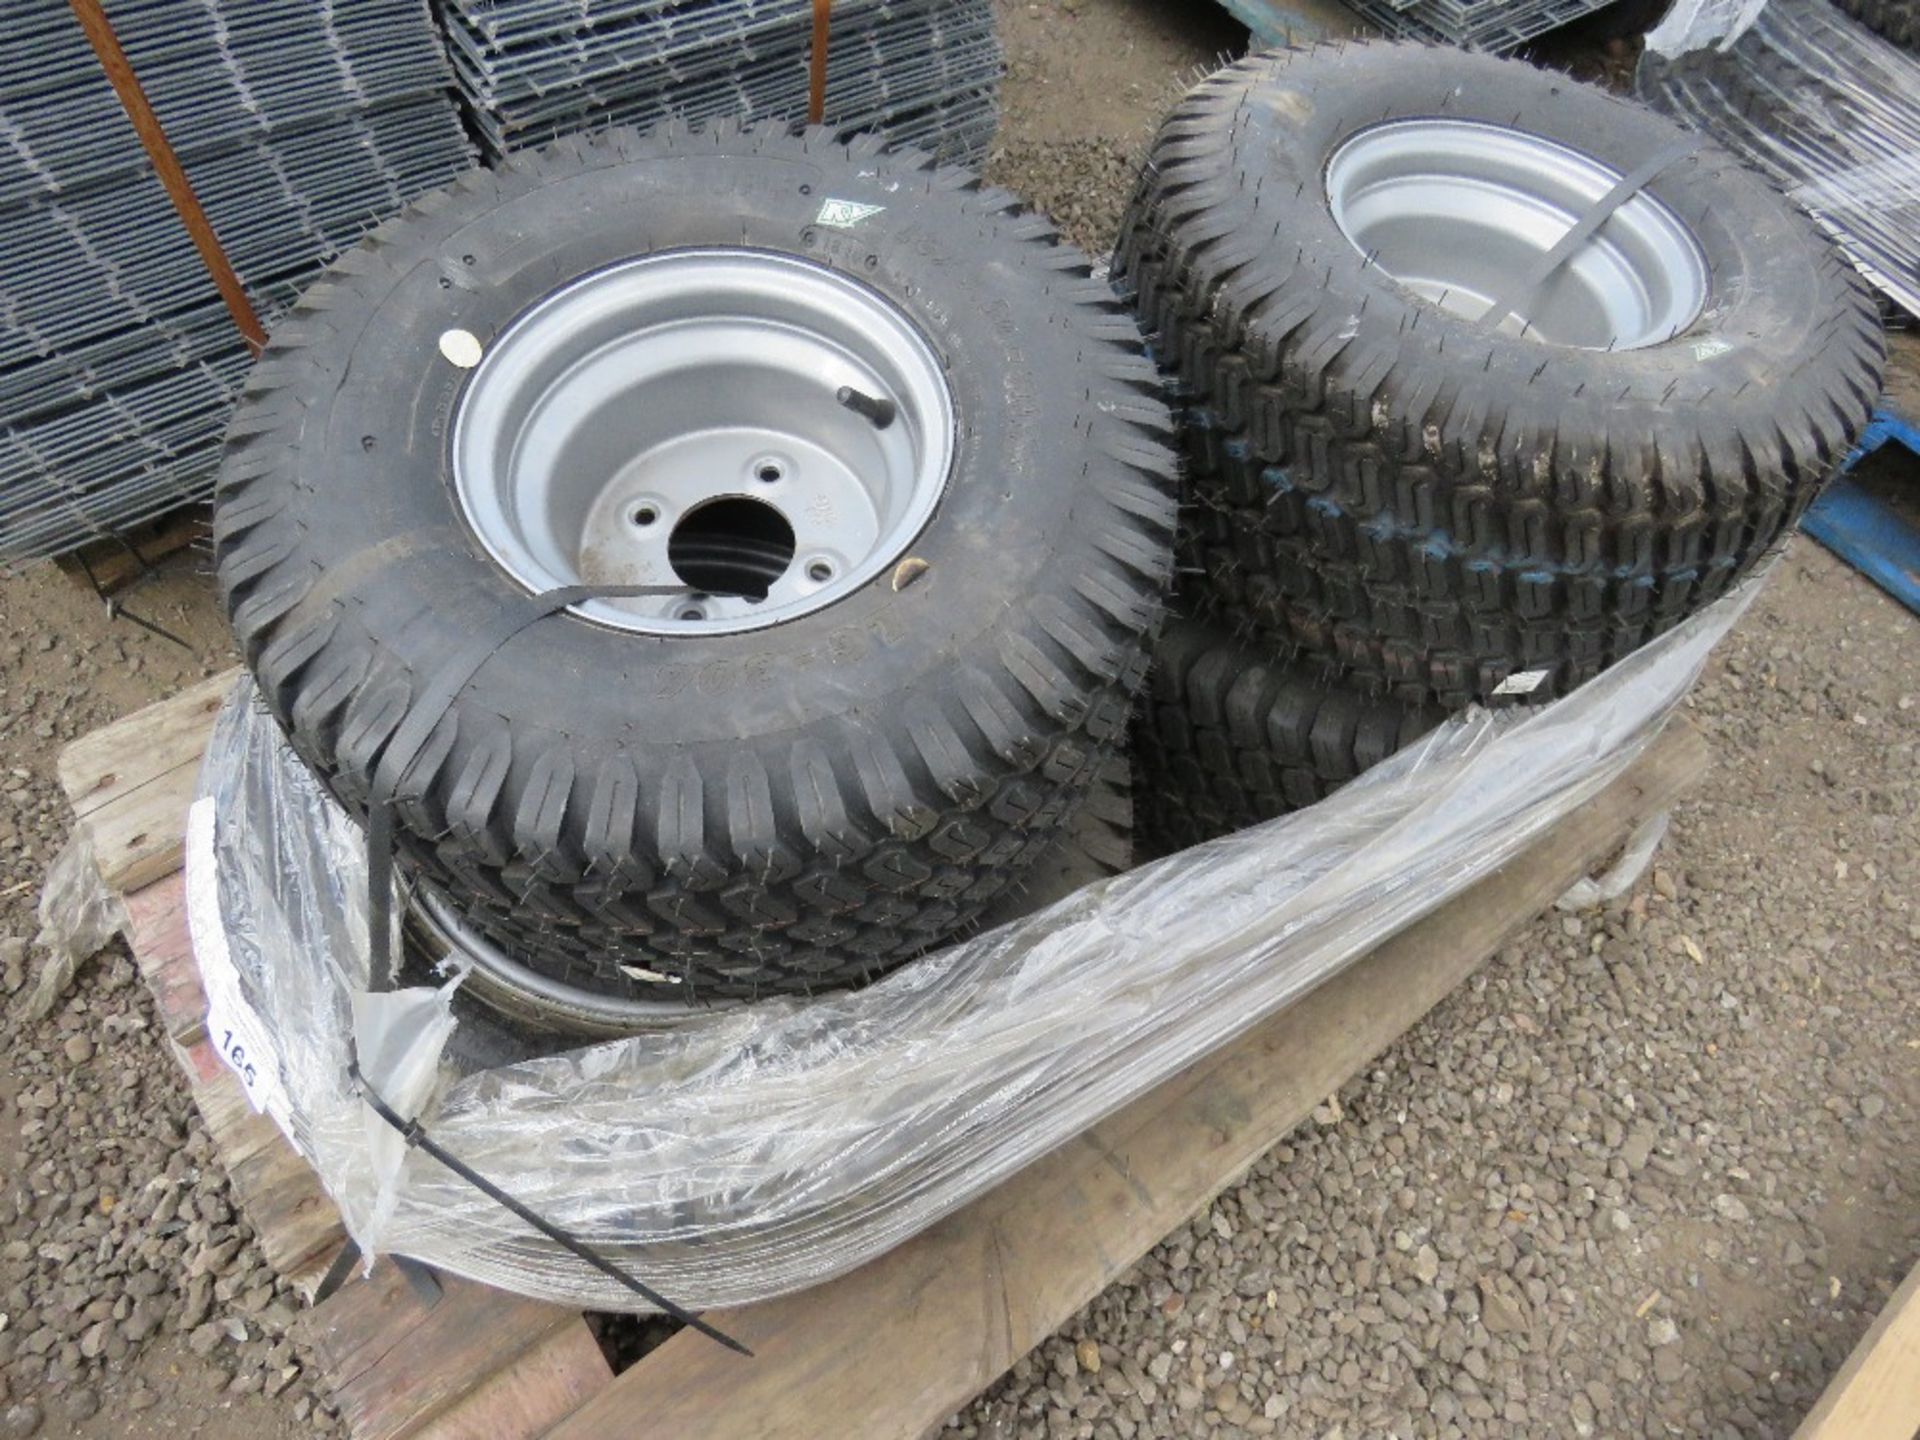 SET OF 4 X RIDE ON TRACTOR/MOWER WHEELS AND TYRES, TORO TYPE.